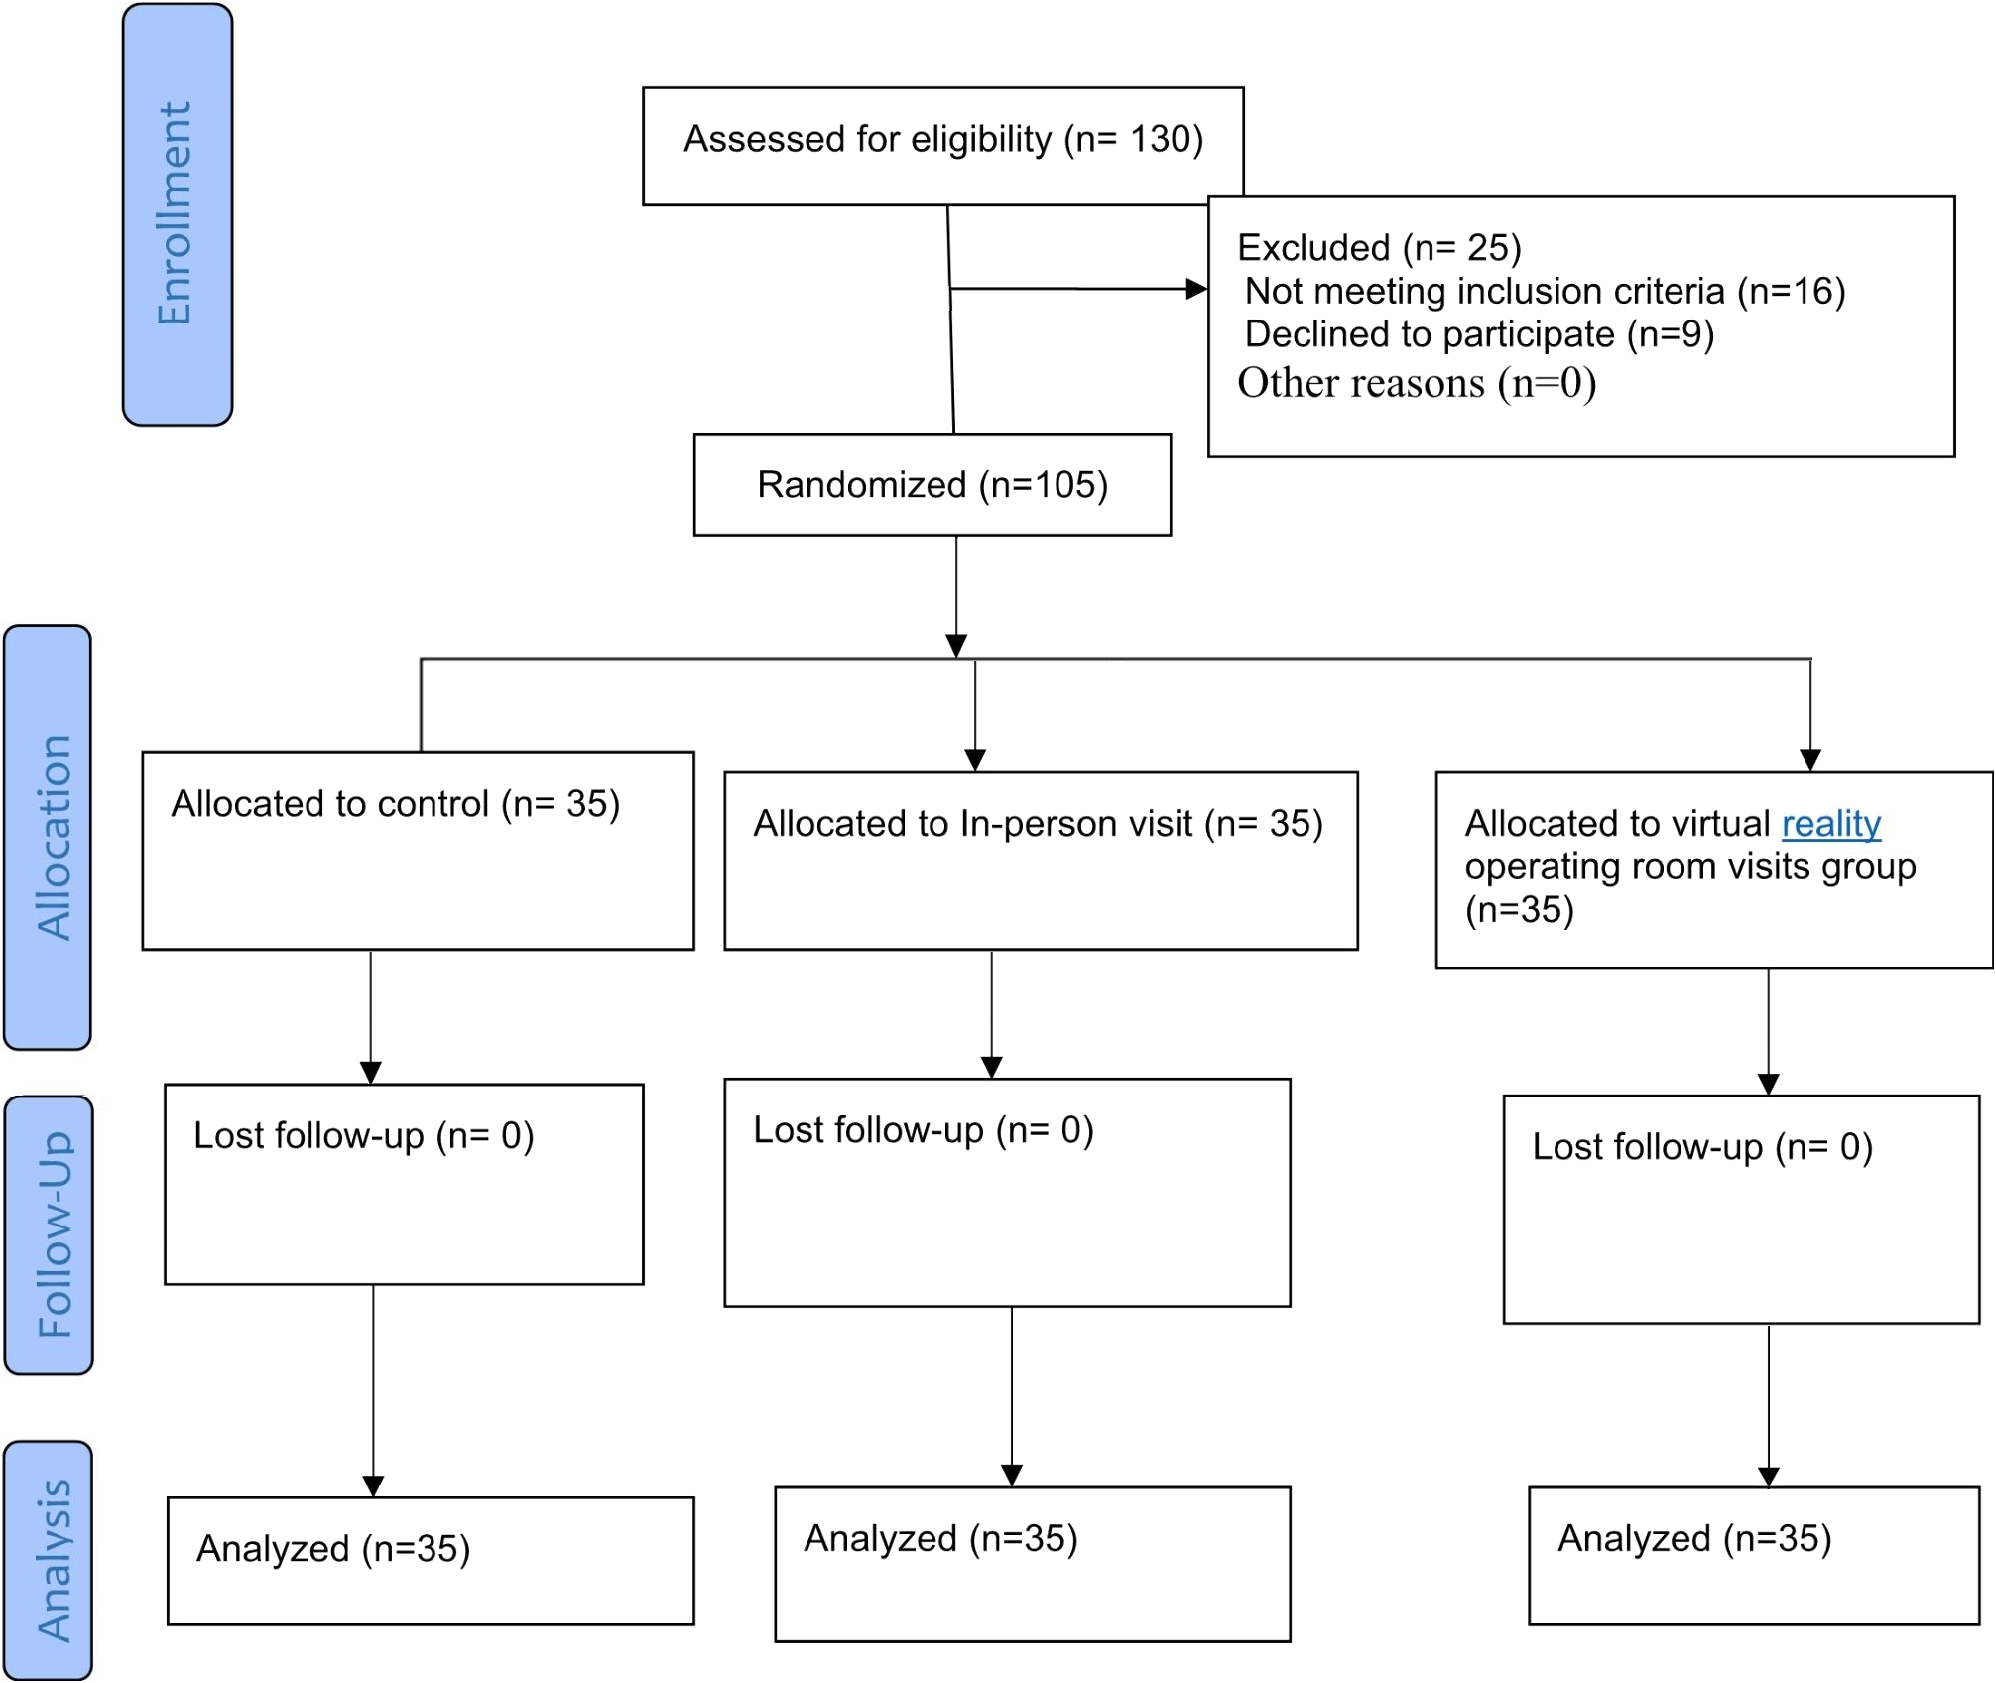 Does a 30-minute introductory visit to the operating room reduce patients’ anxiety before elective surgery? A prospective controlled observational study